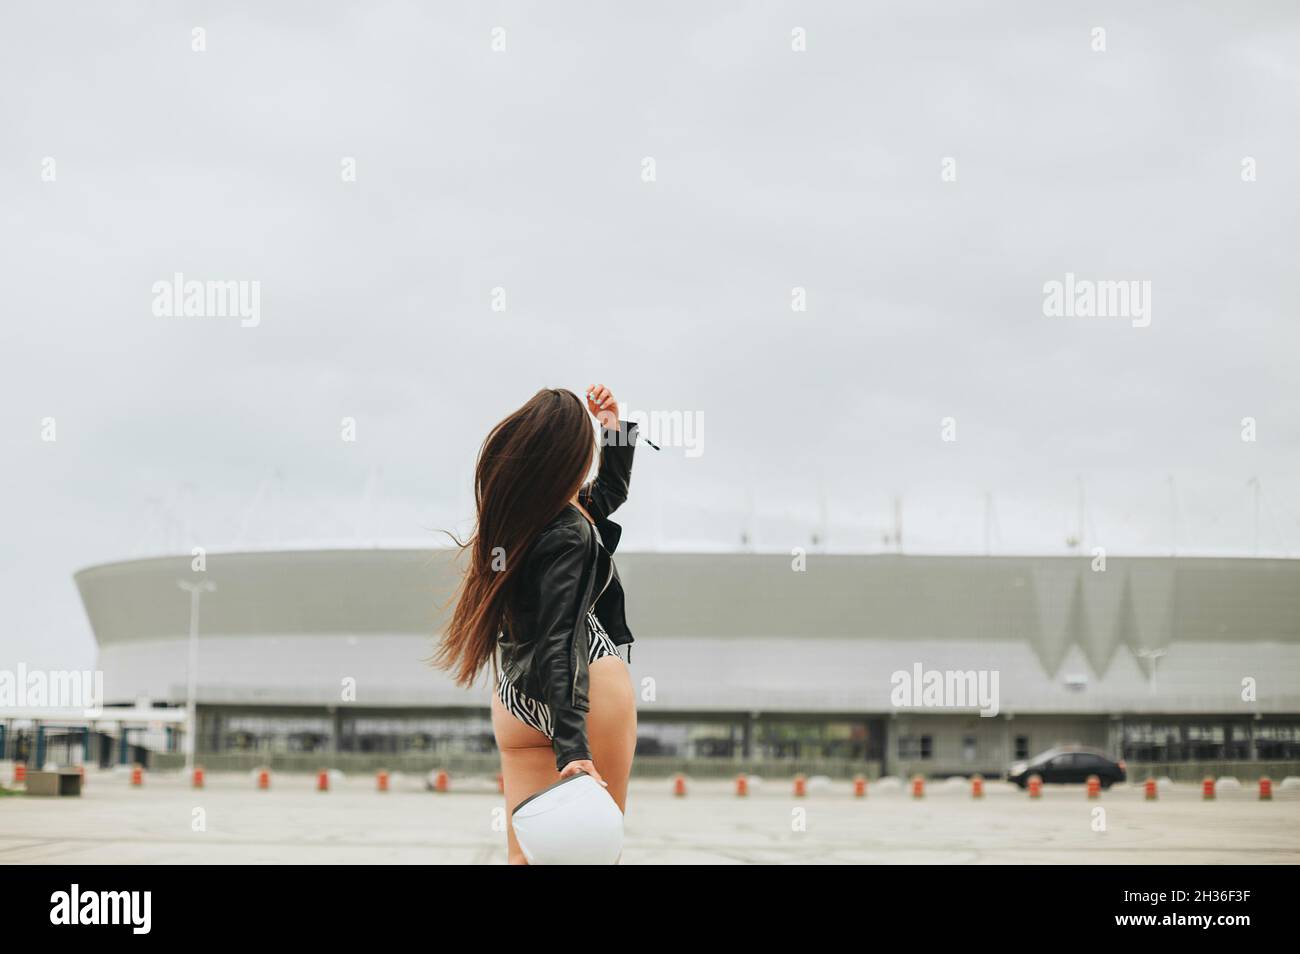 Rear view of slim brunette biker girl in bodysuit and leather jacket with safety bike helmet in hands posing at empty stadium outdoors Stock Photo